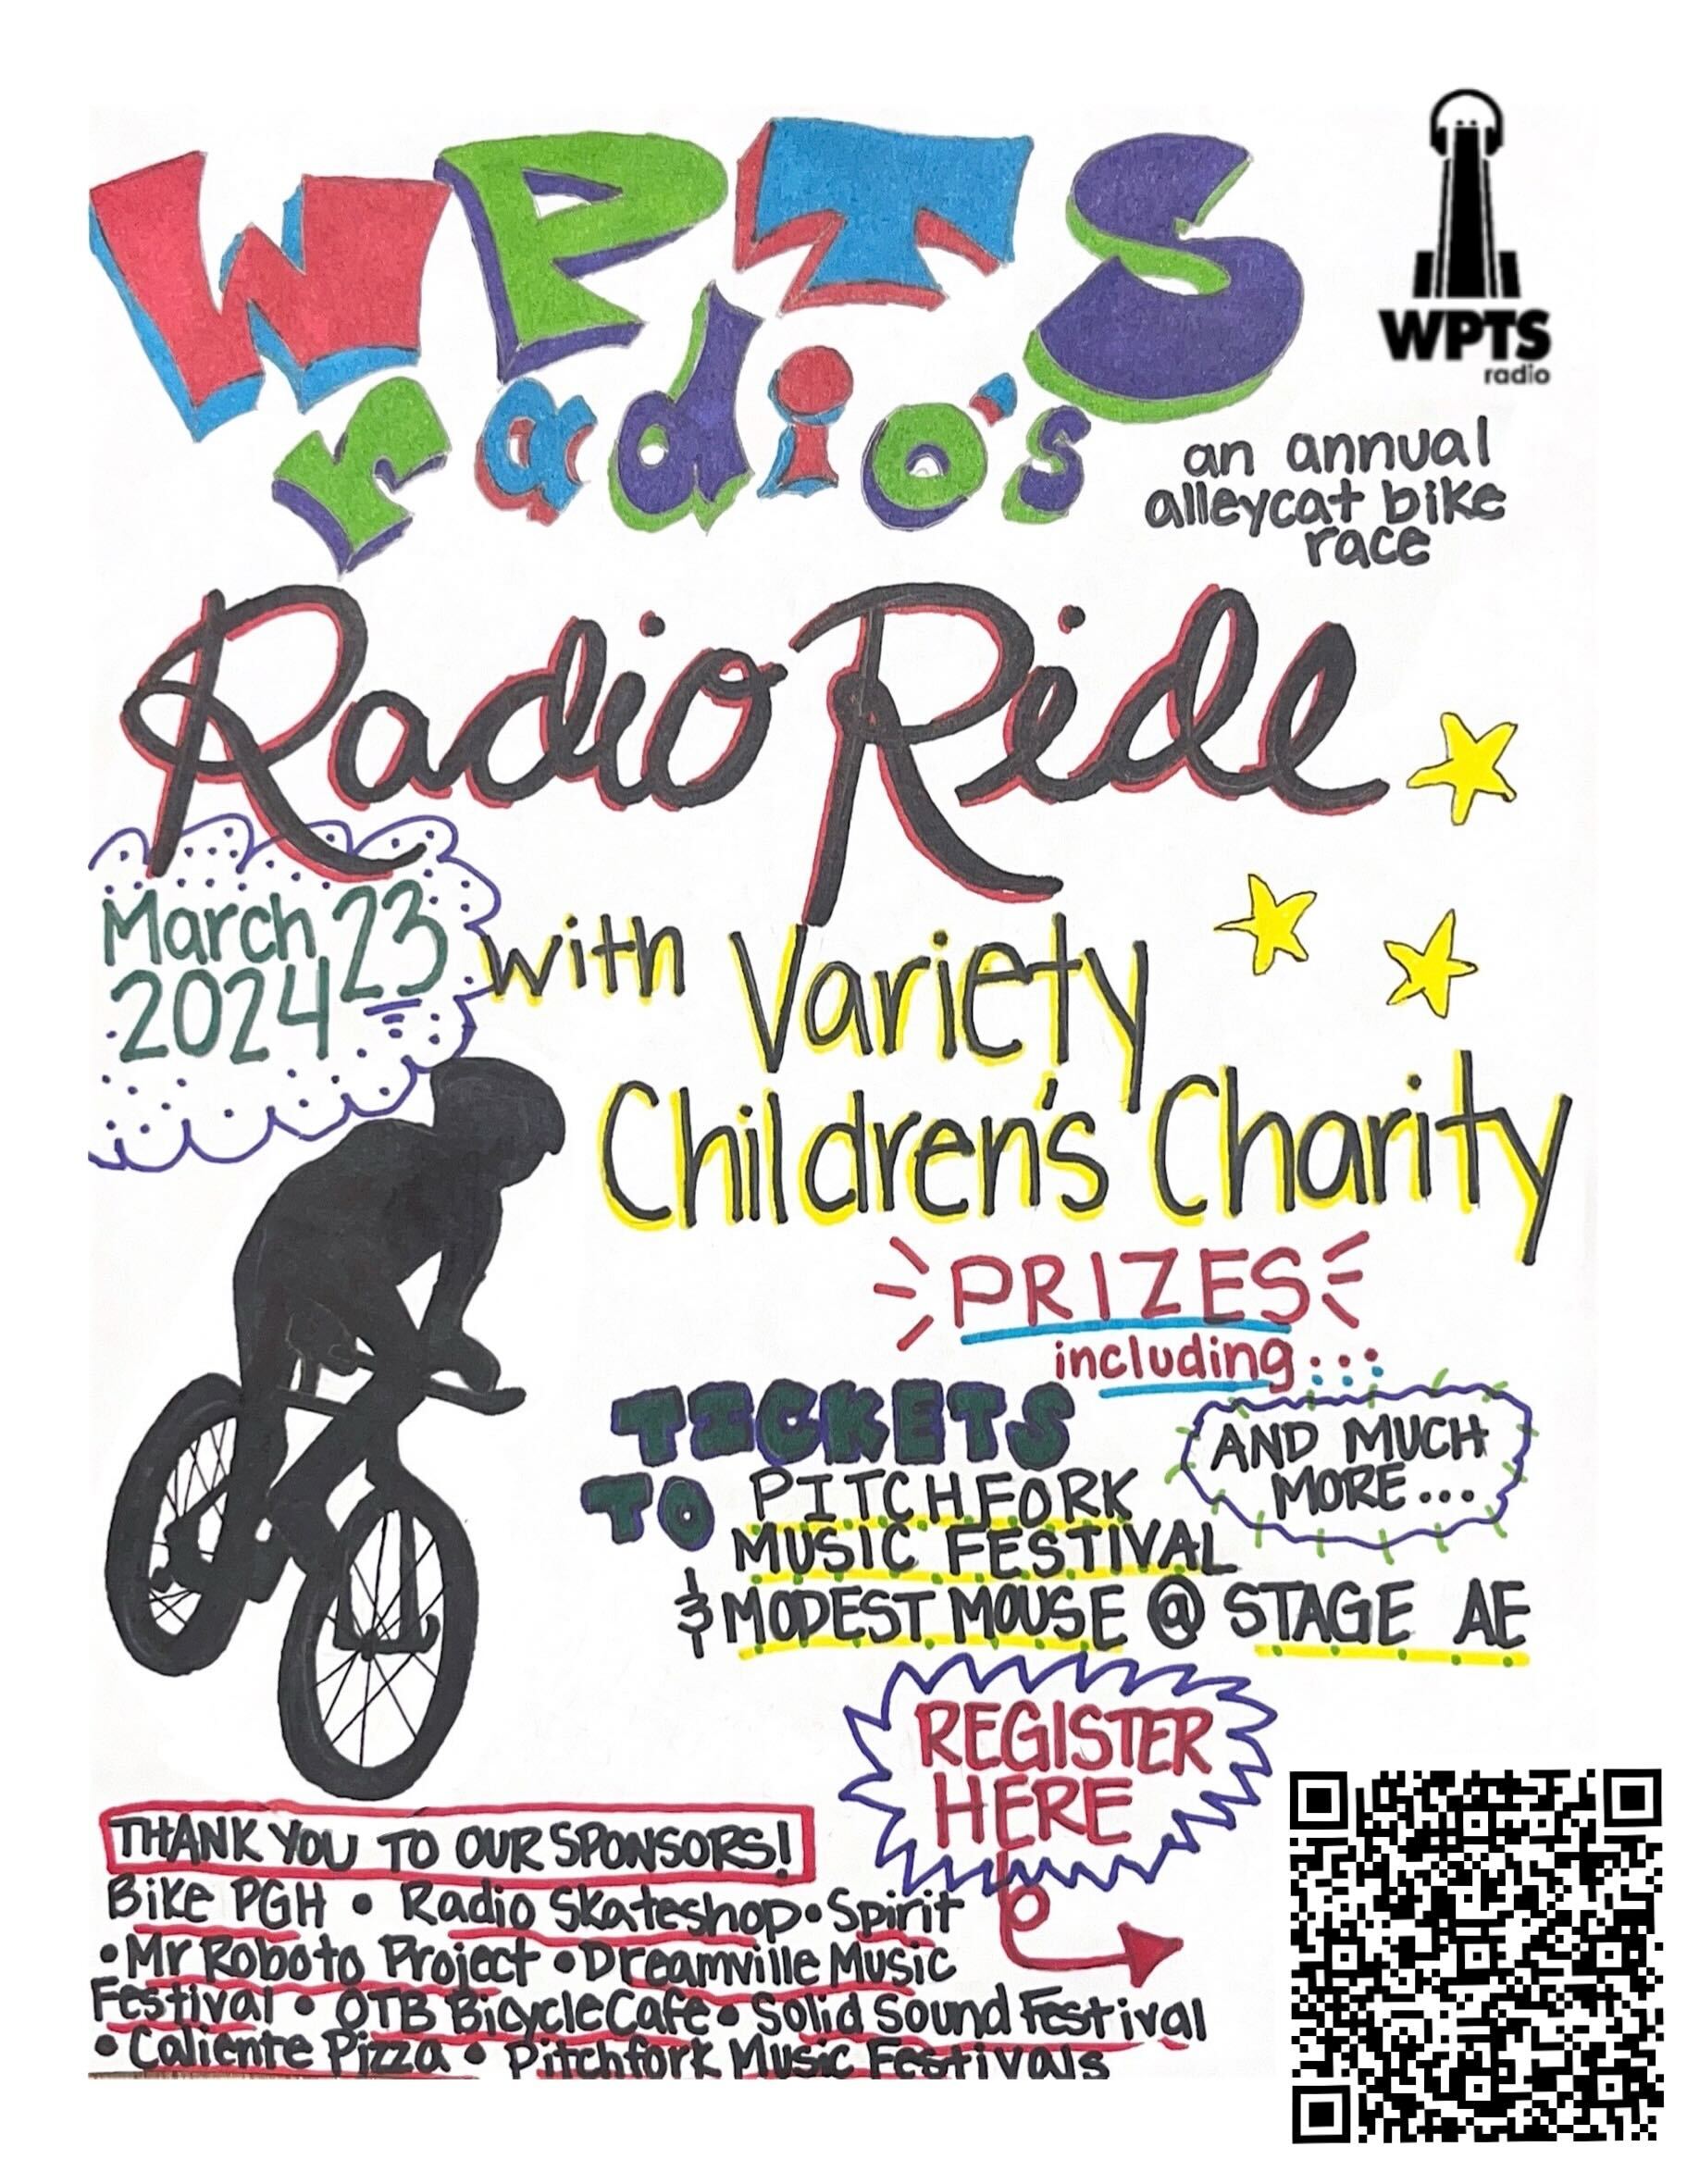 Register for WPTS Radio Ride!